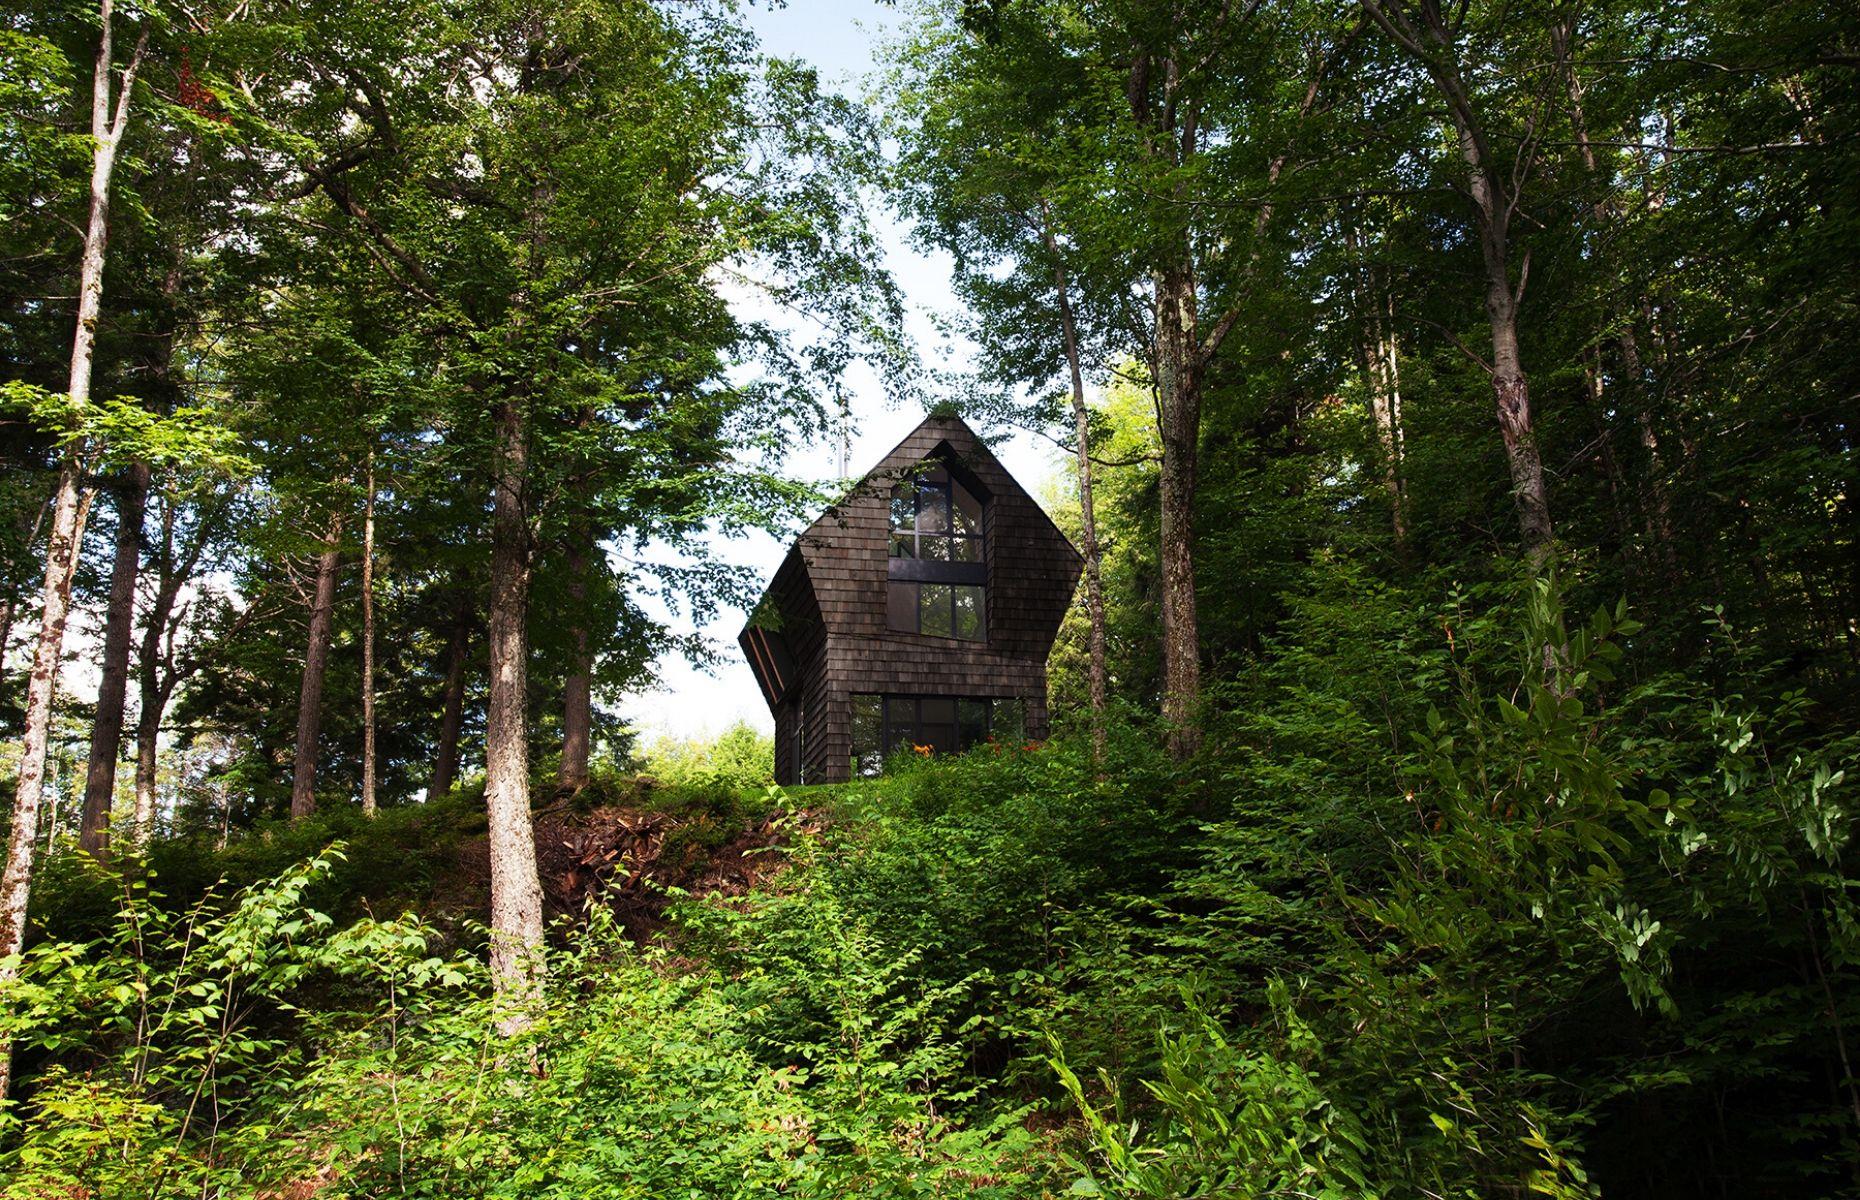 <p>La Colombière was originally created as a small storage space for the local lumberjack, but was later transformed into a hidden hideaway by its new owner. Redesigned by <a href="https://www.yh2architecture.com/">yh2 Architecture</a> in 2015, the clandestine cabin is rustic and contemporary in equal measure. While the outside is clad in dark cedar to match the surrounding conifer trees, the inside is a wonderland of modern design.</p>